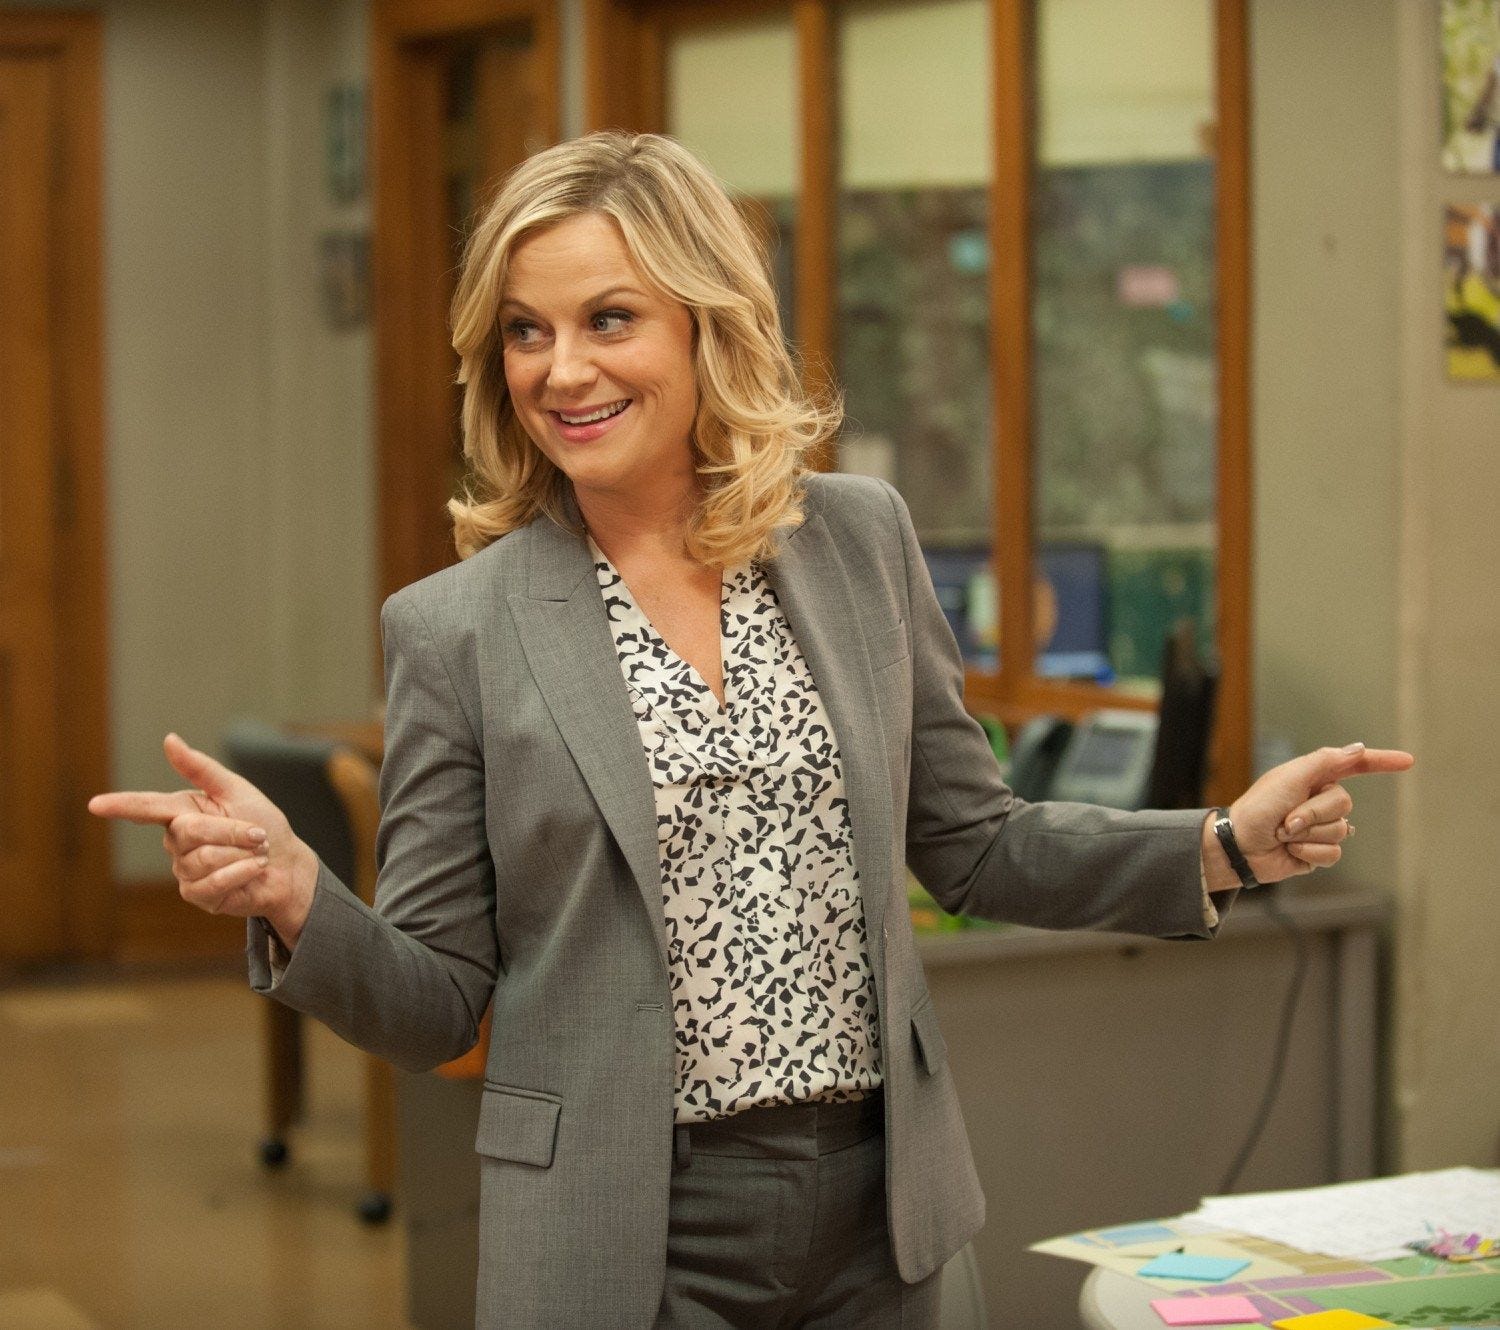 Why We All Fancy Indiana Jones and Want Leslie Knope for President